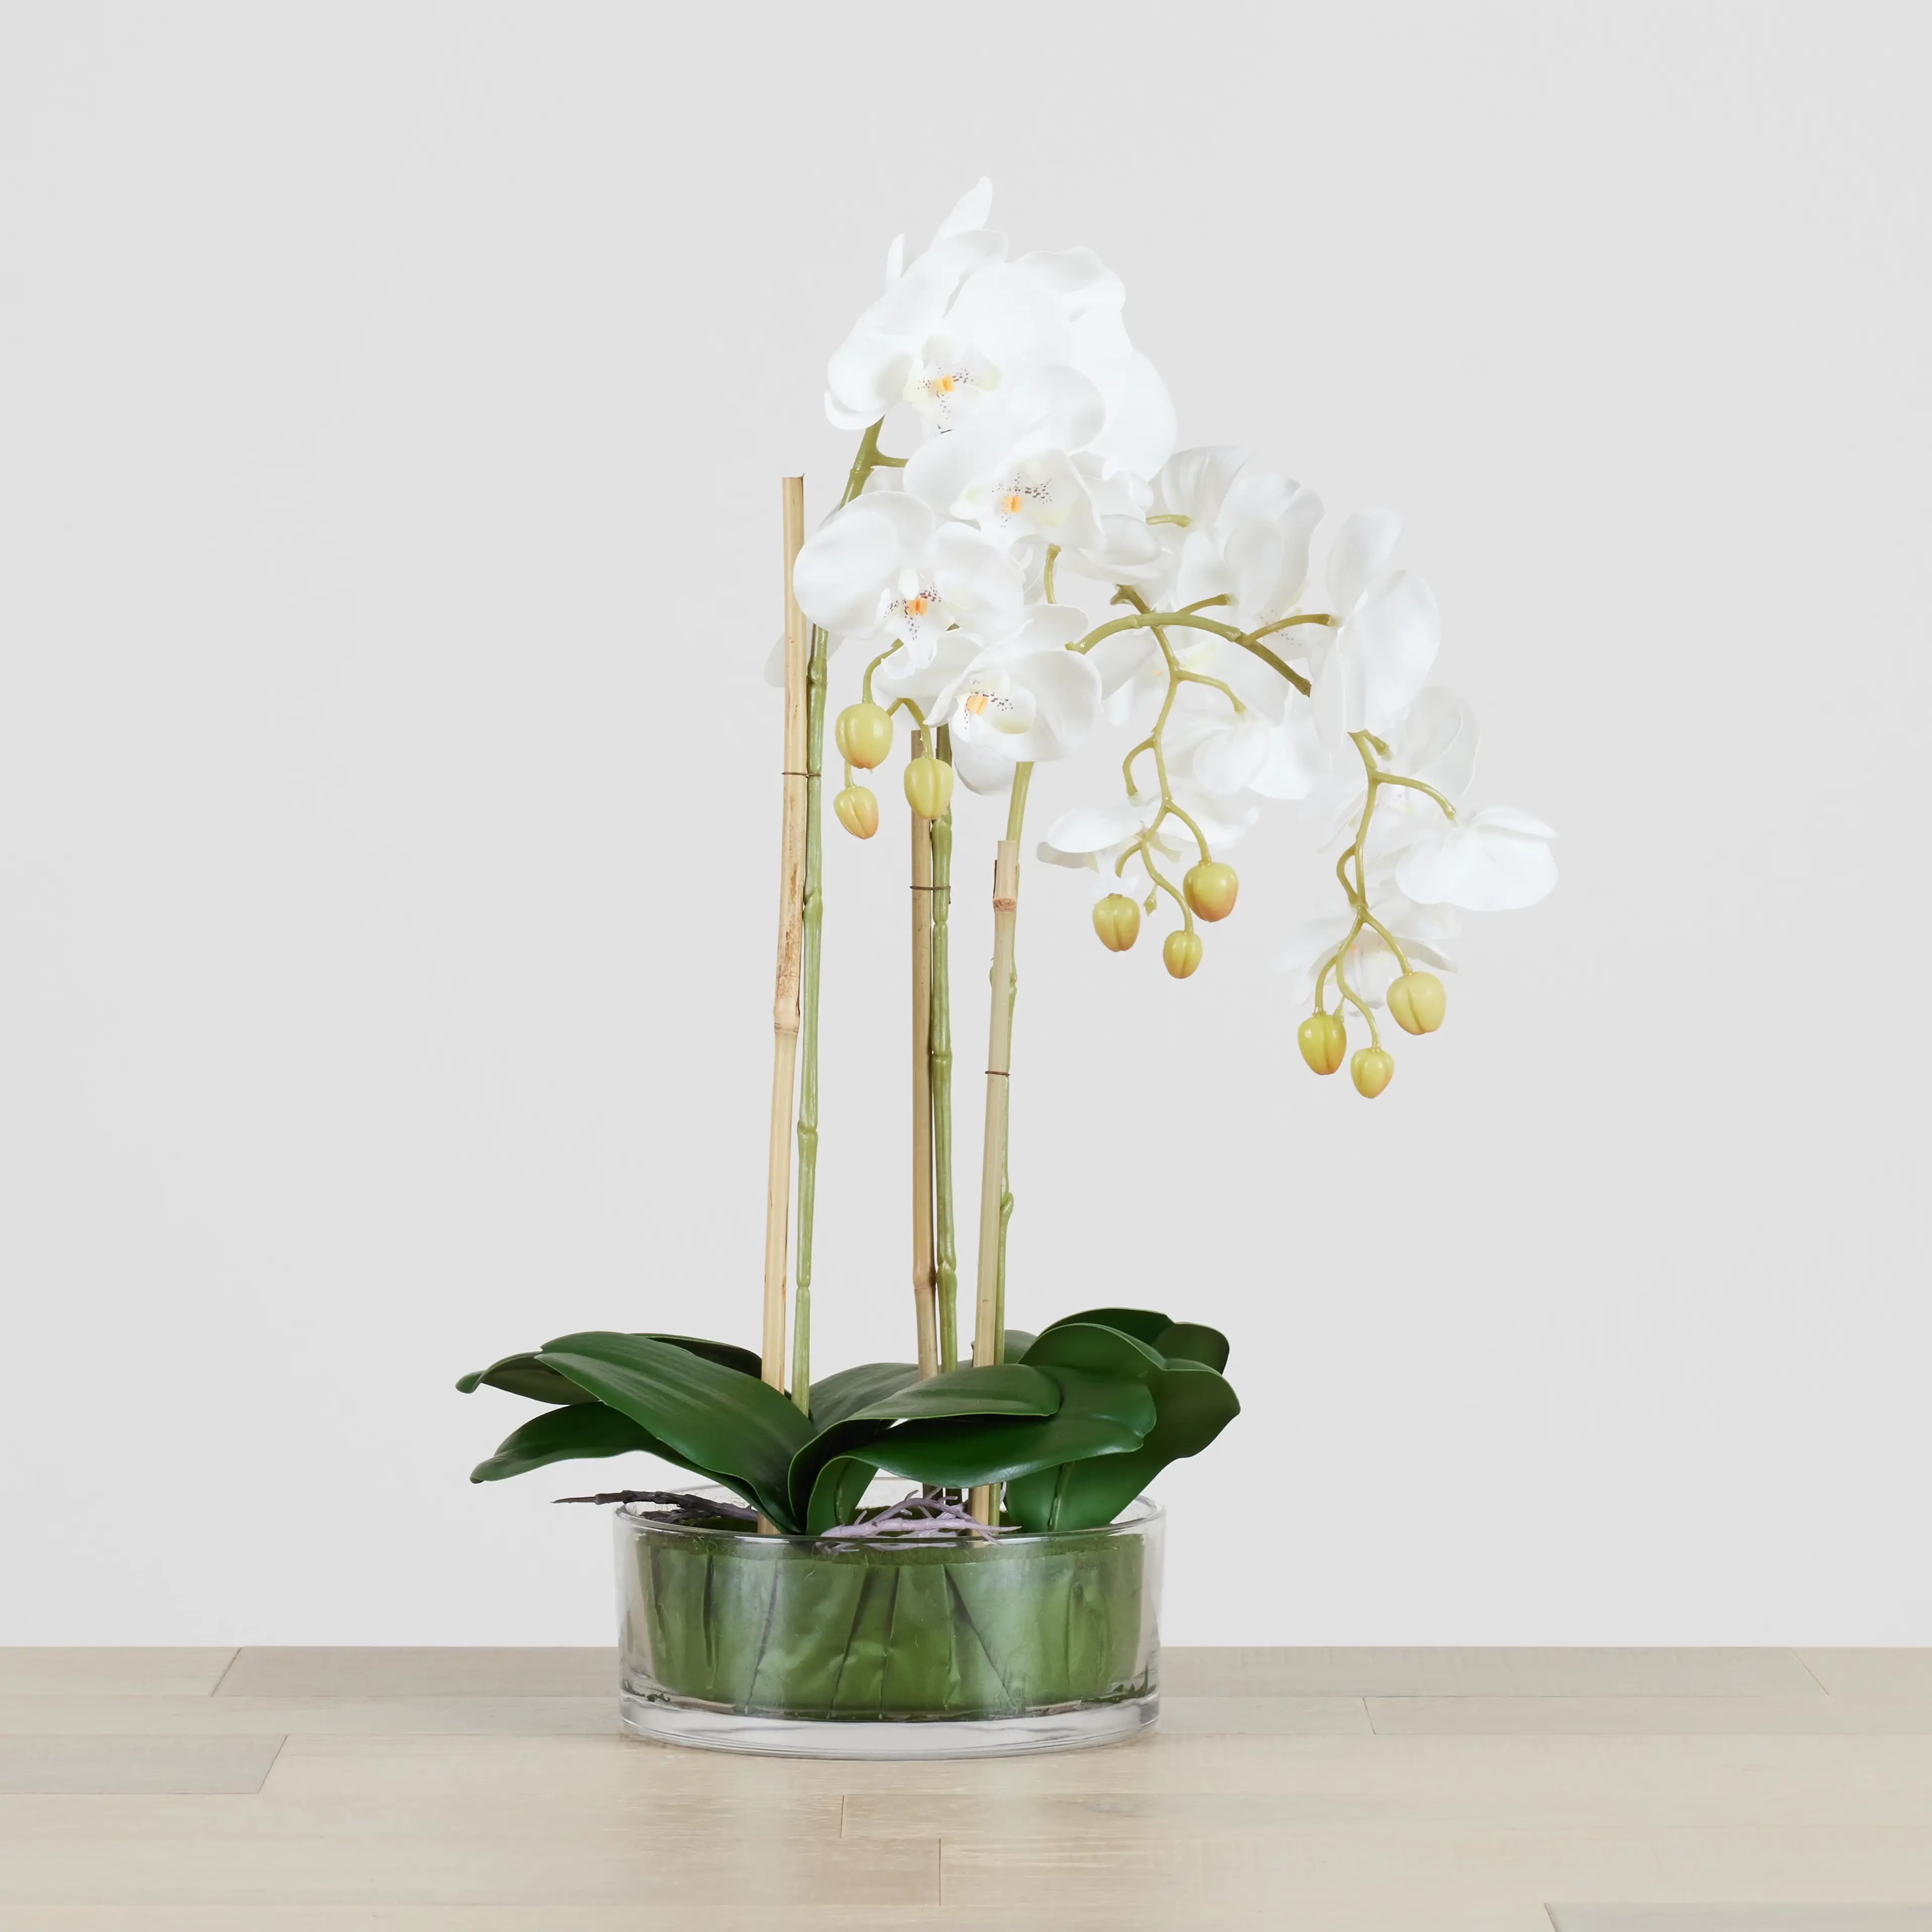 Exquisite Elegance: The Lifelike Charm of the Potted Glass 22" Orchid in Home Decor